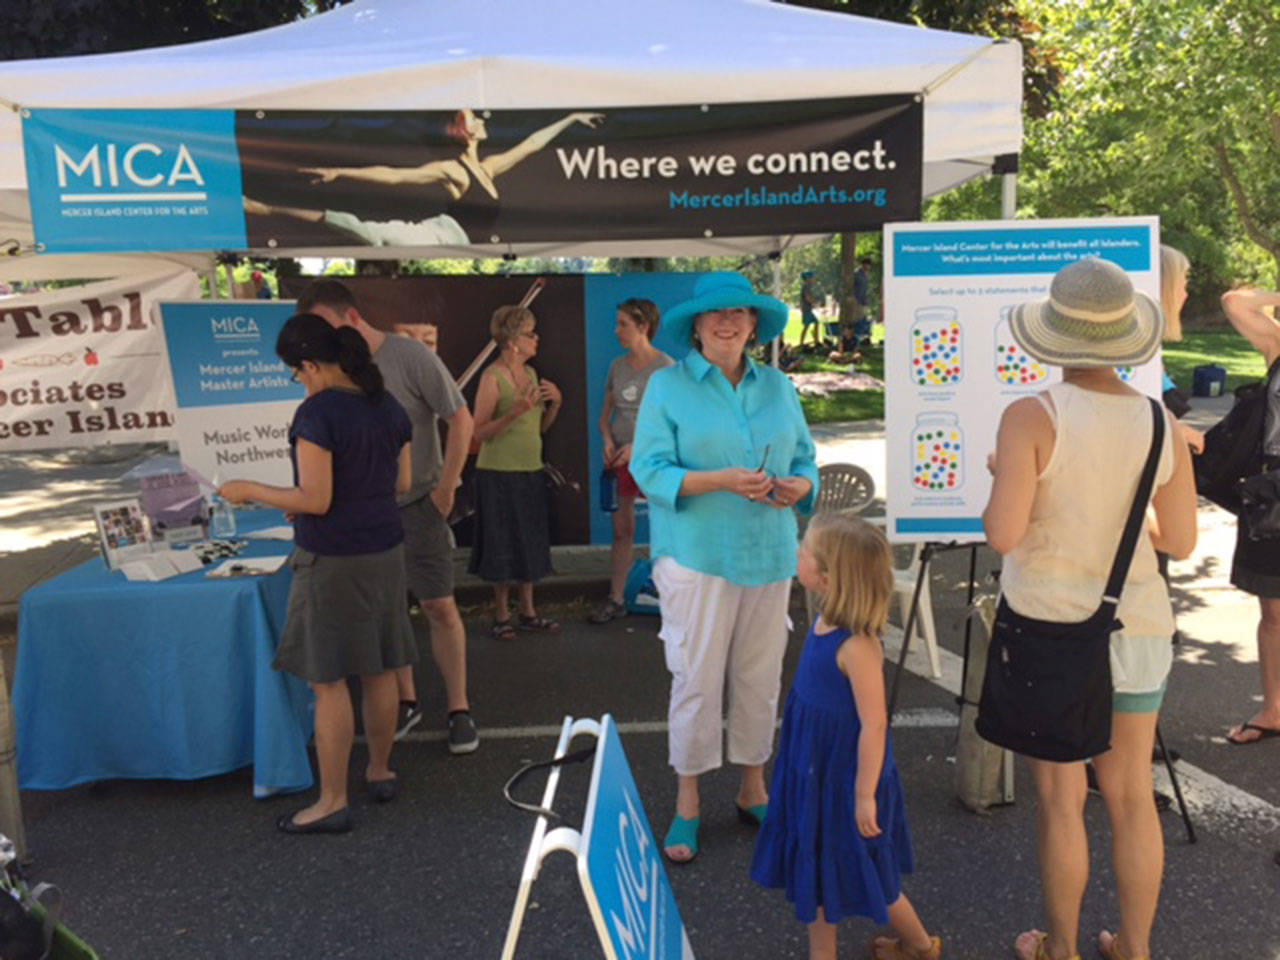 MICA board members Stacy Duel and Sue Sherwood, with MICA staffers Keith Imper and Jami Cairns, answer questions at the MICA booth at the Farmers Market. Photo courtesy of Keith Imper